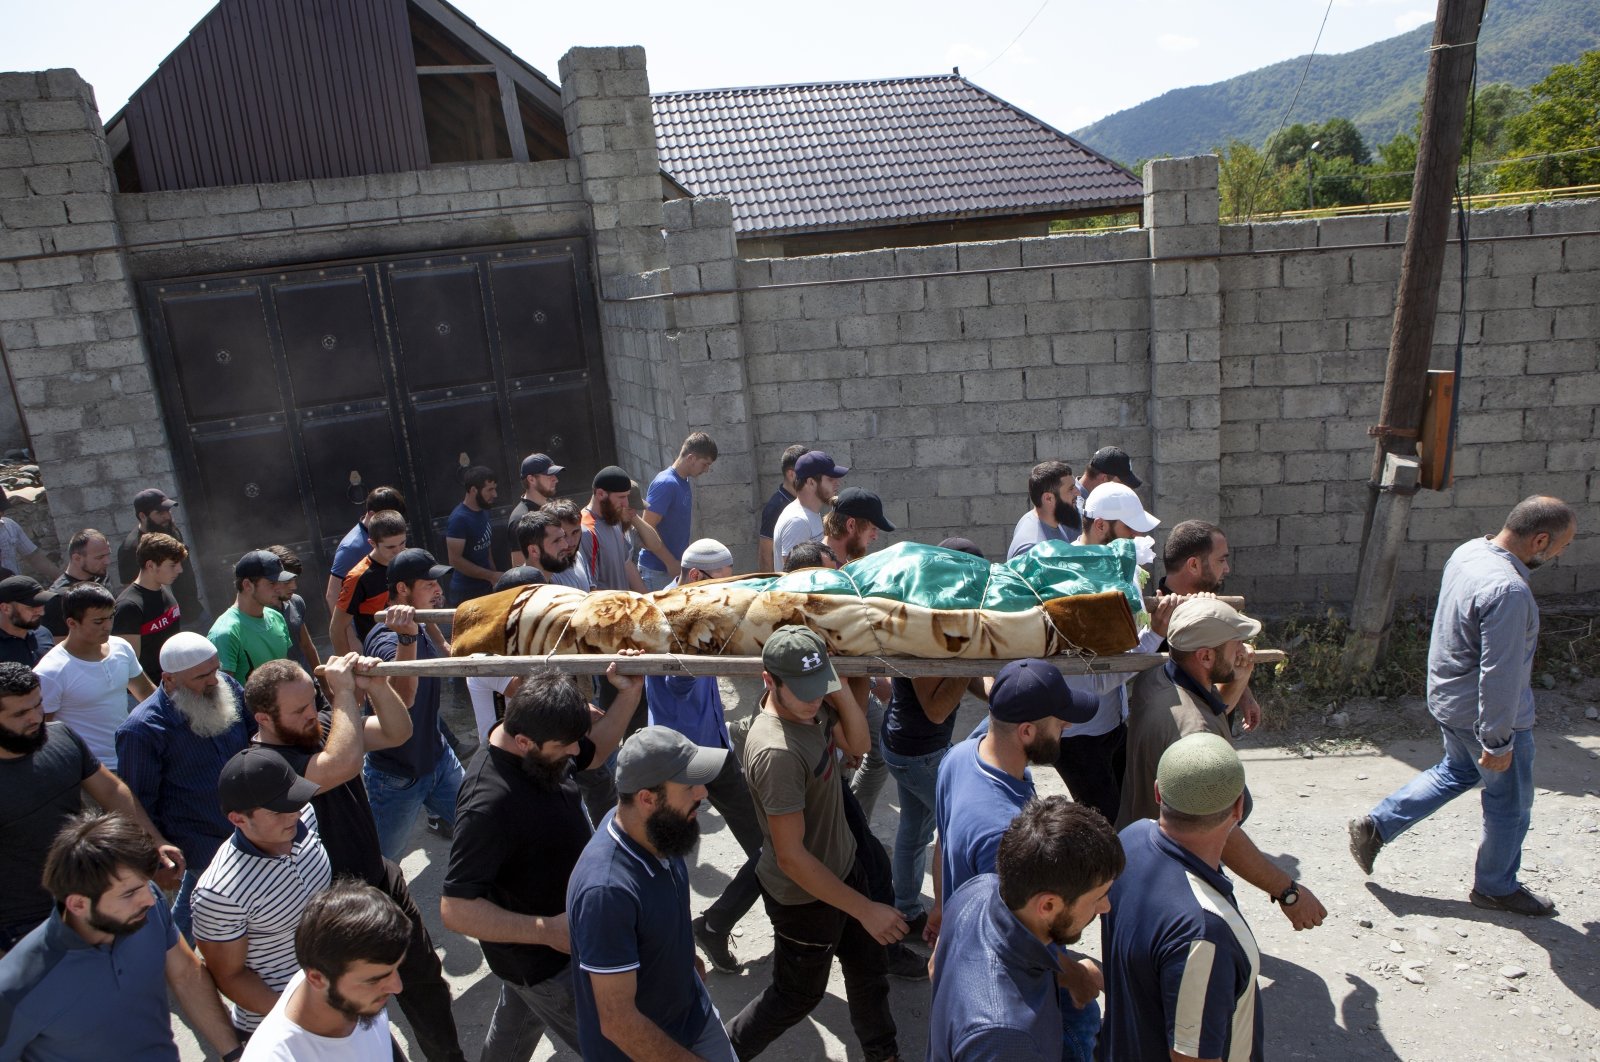 People carry the body of Zelimkhan Khangoshvili, a Georgian Muslim, during his funeral in Duisi village, the Pankisi Gorge valley, Georgia, Aug. 29, 2019. (AP Photo)